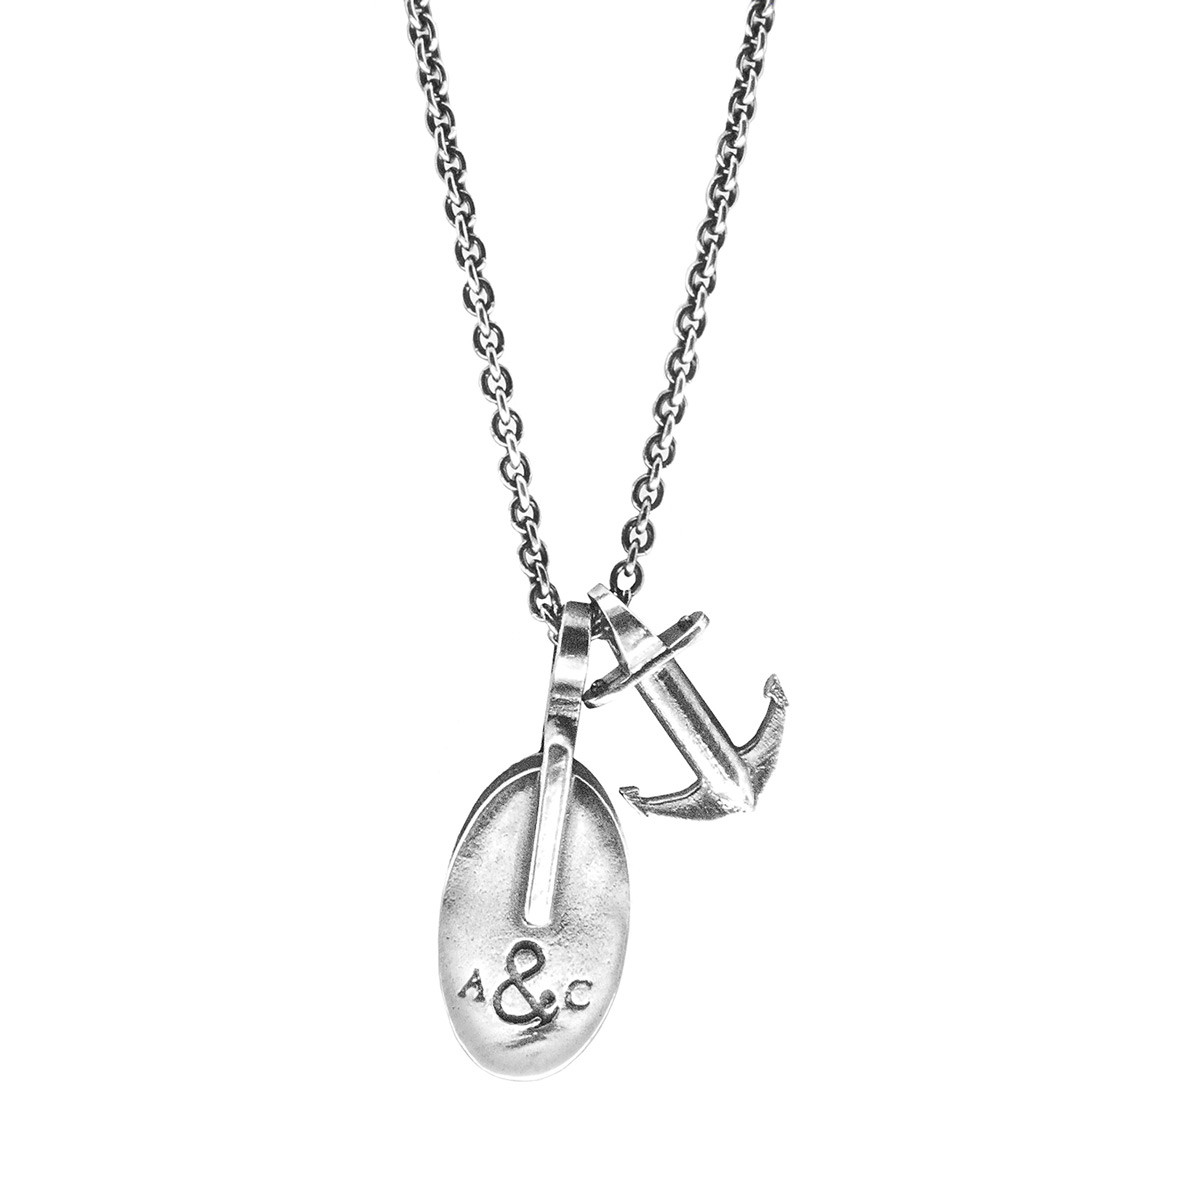 Anchor & Crew London Pulley Silver Necklace Pendant